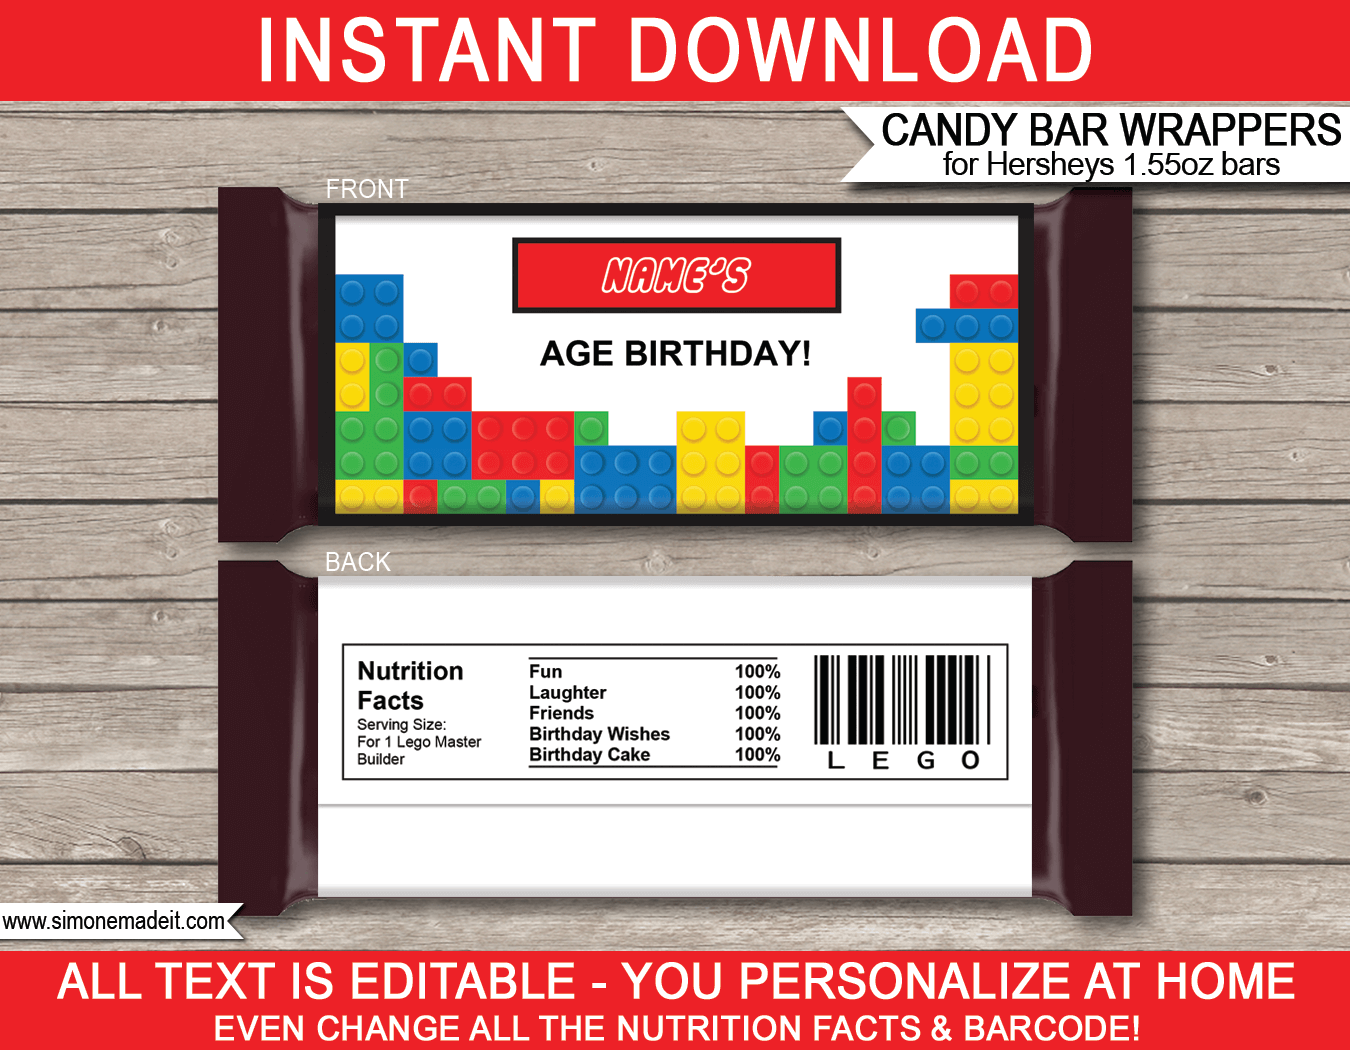 Lego Hershey Candy Bar Wrappers | Birthday Party Favors | Personalized Candy Bars | Editable Template | INSTANT DOWNLOAD $3.00 via simonemadeit.com